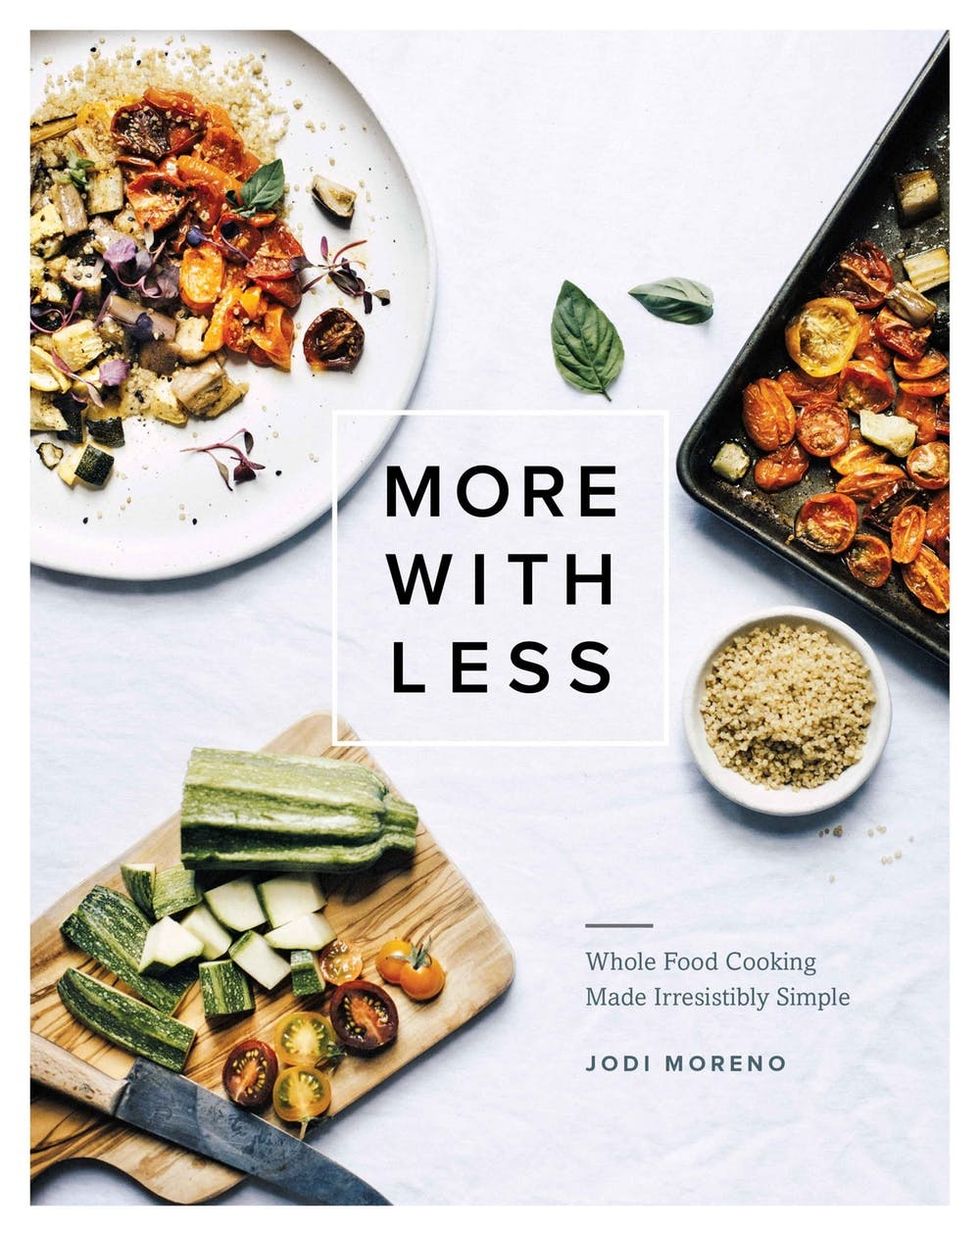 More with Less by Jodi Moreno is a whole food cookbook full of seasonal eating strategy.